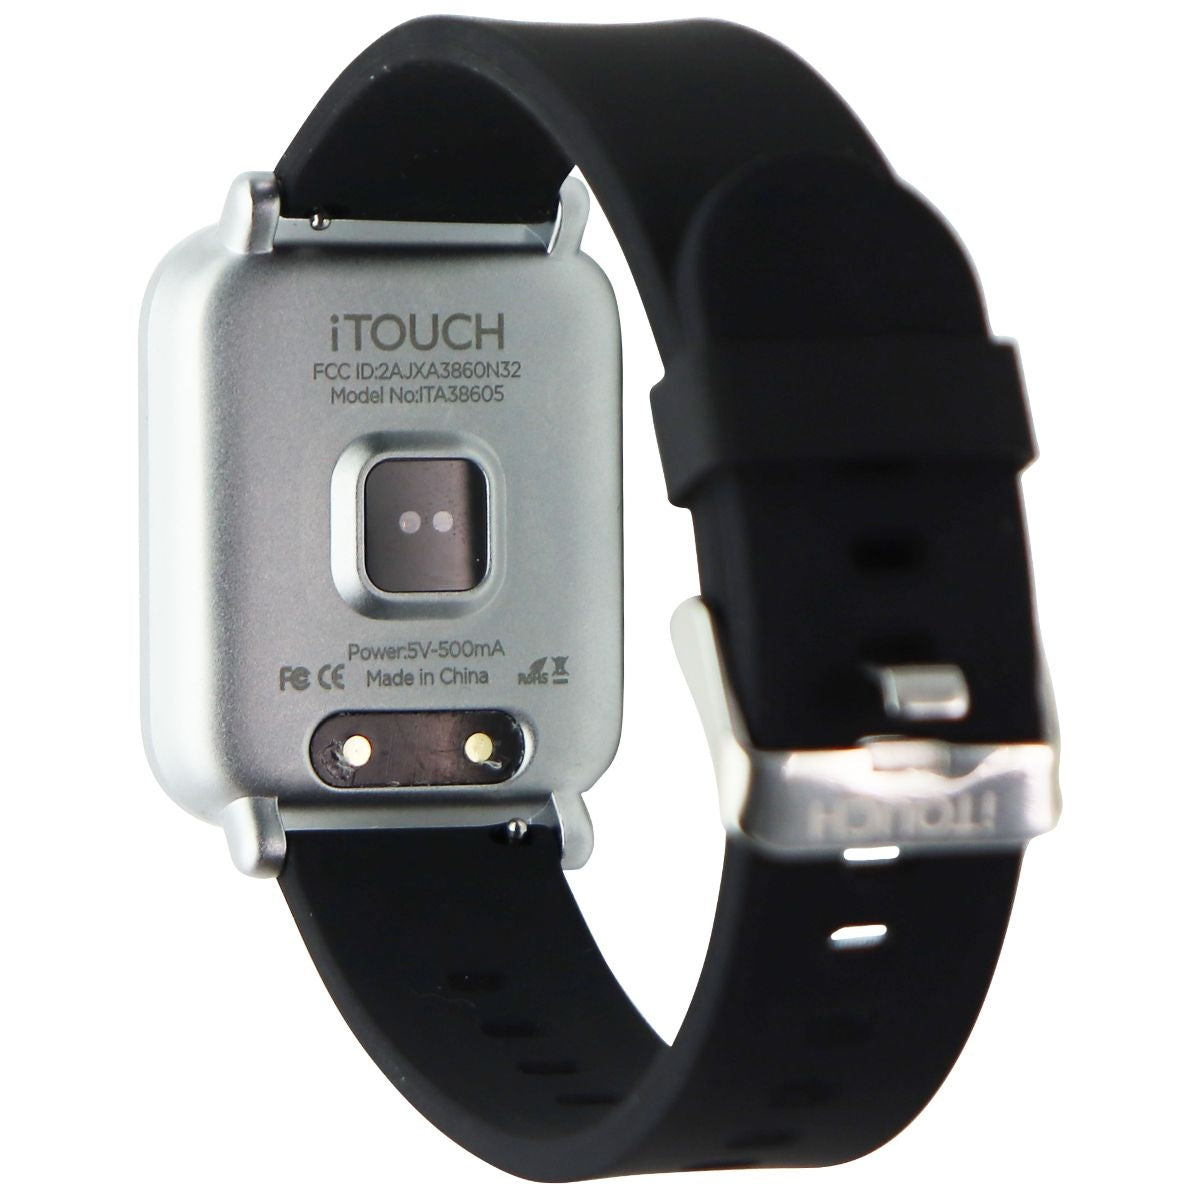 iTouch Air 2S Special Edition Smartwatch - Silver/Black (ITA38605) Smart Watches ITOUCH    - Simple Cell Bulk Wholesale Pricing - USA Seller